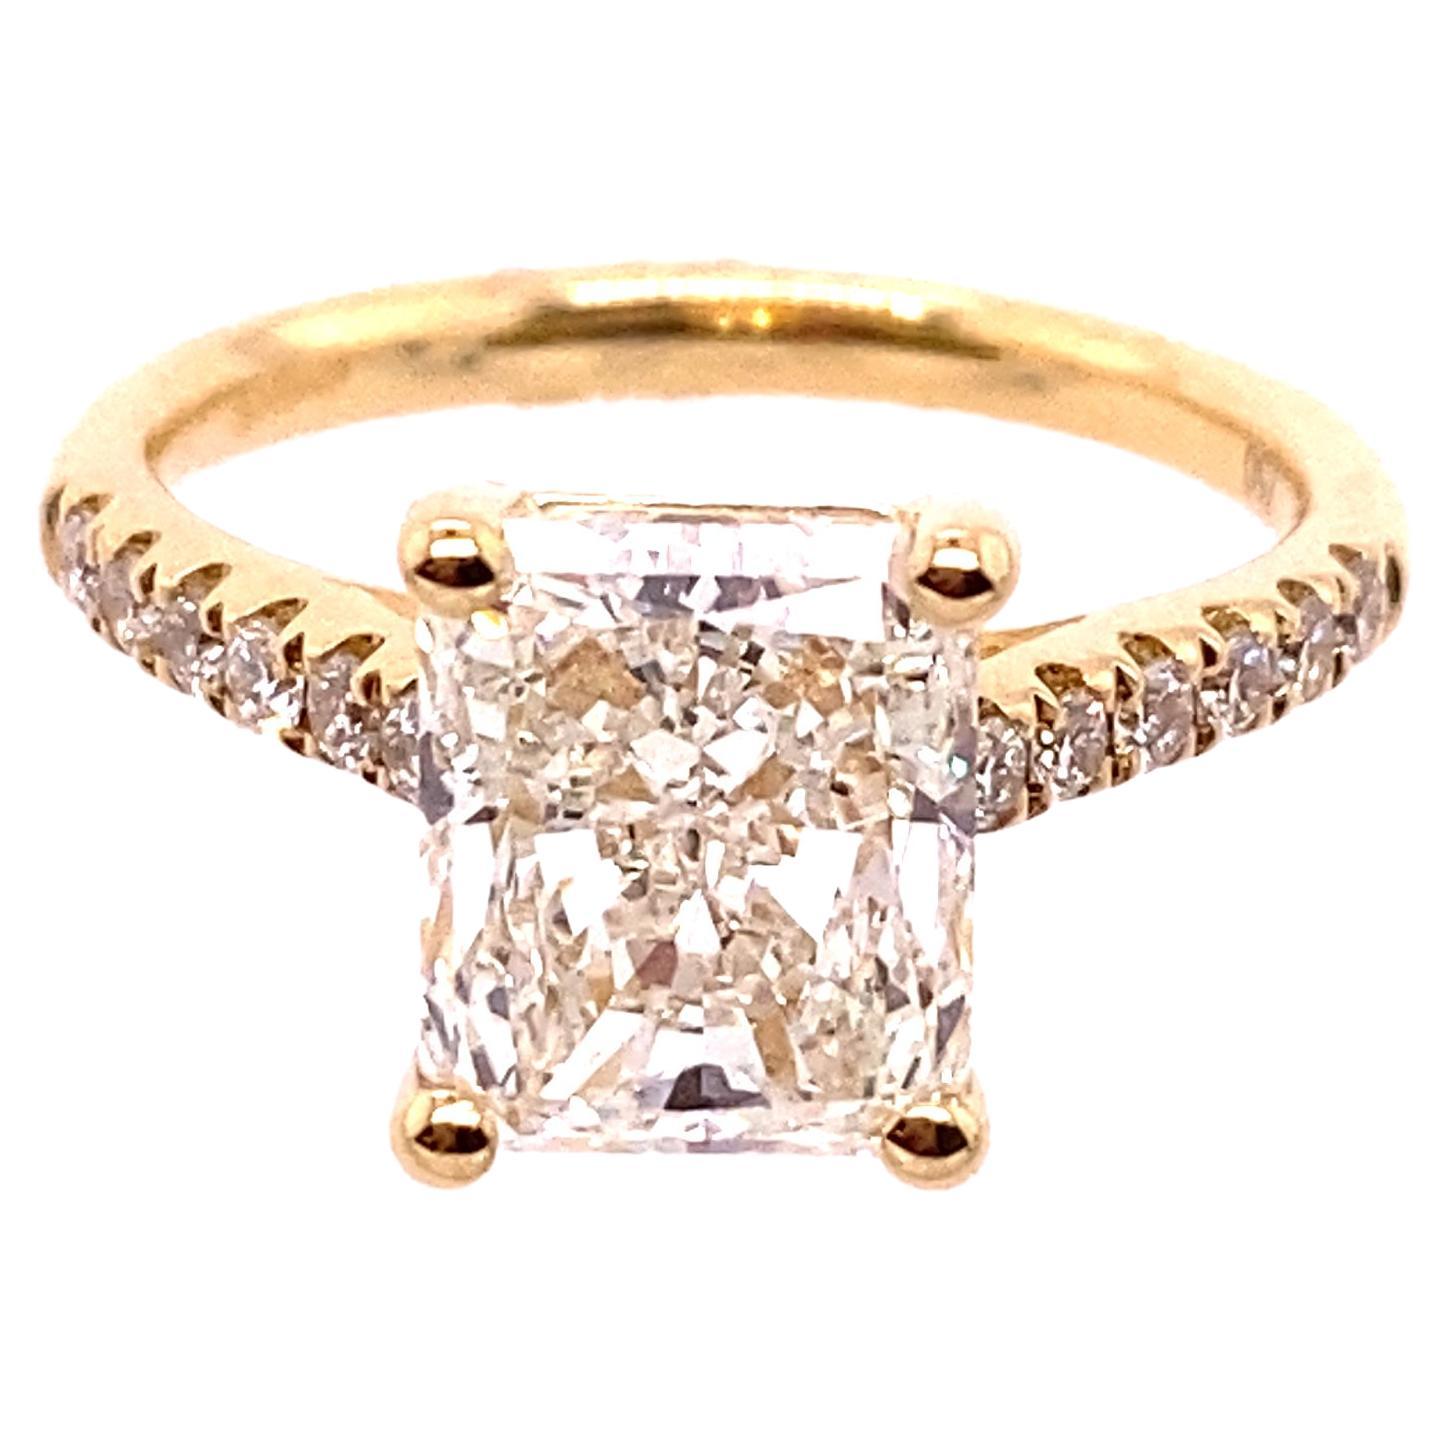 3.01ct I/VS1 GIA Certified Radiant Cut Natural Diamond, Set In 18ct Yellow Gold For Sale